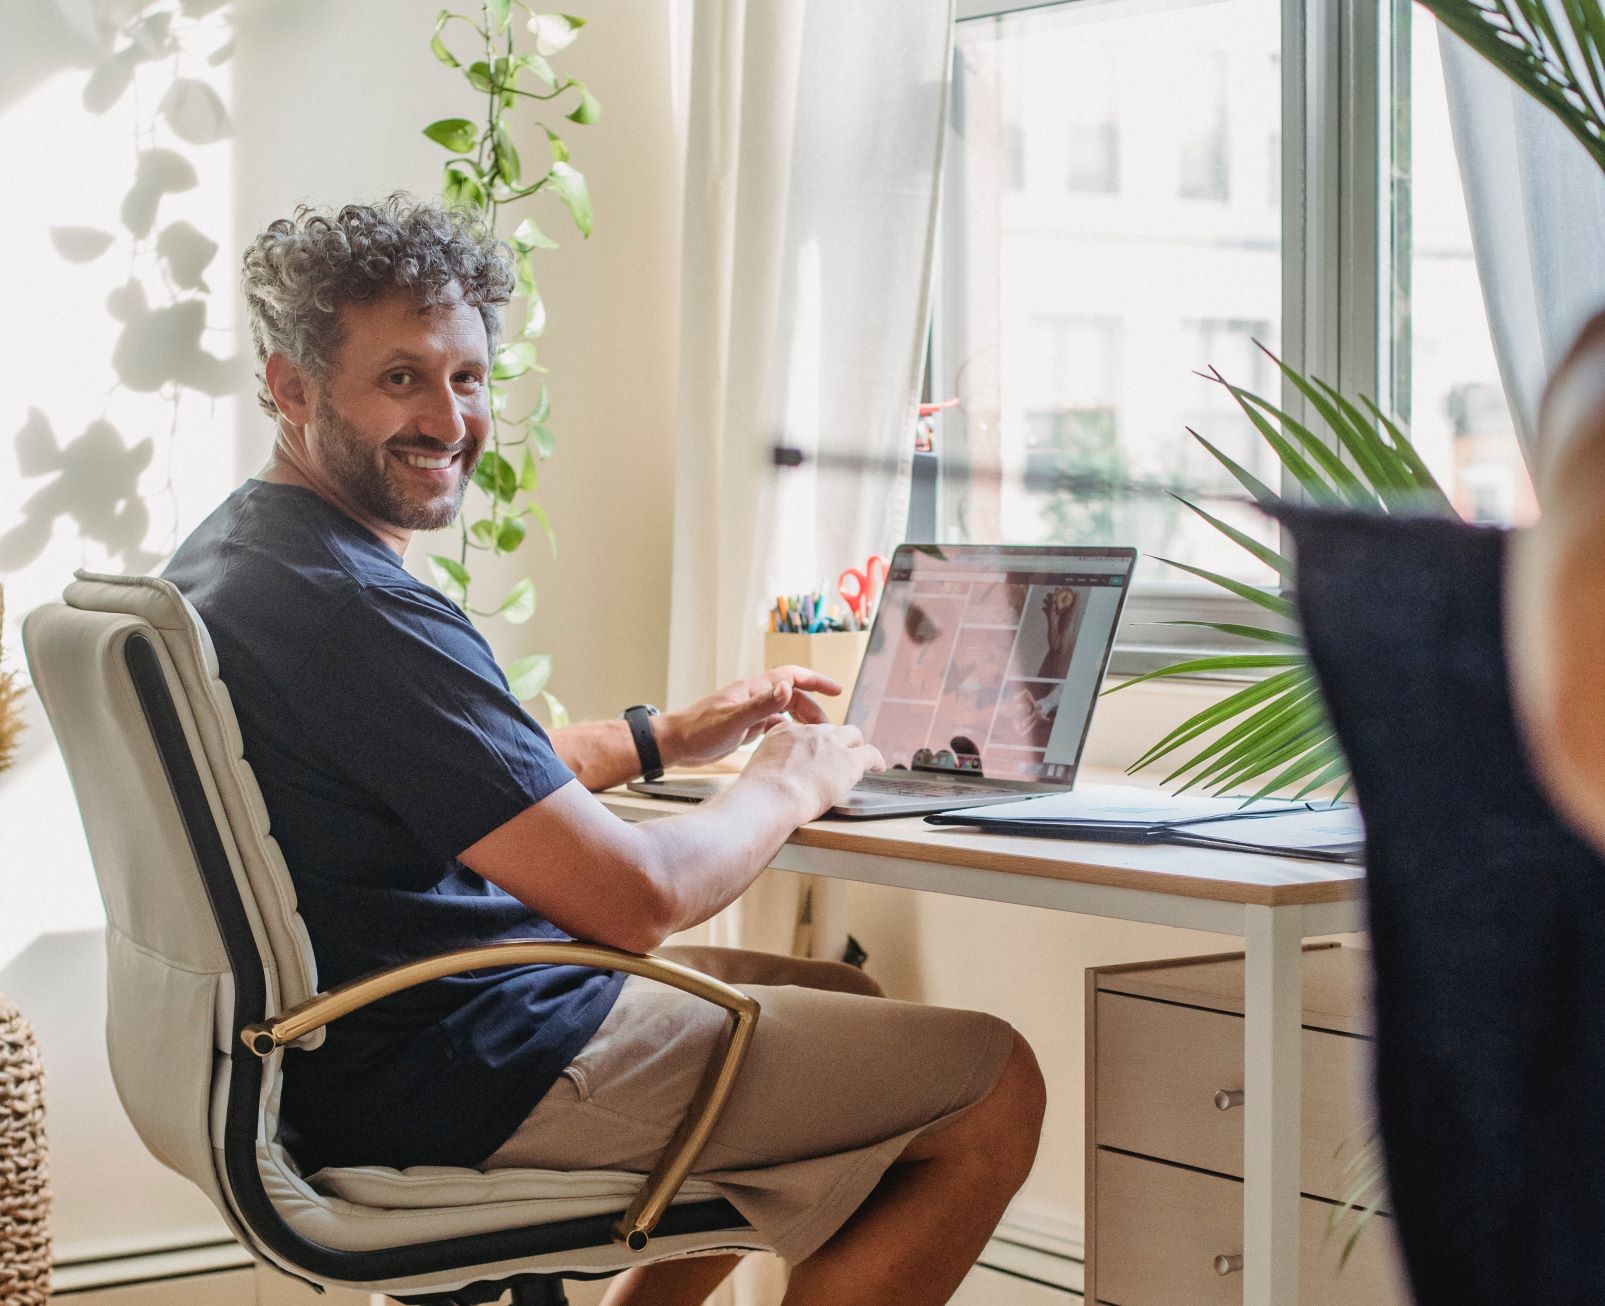  Employee is happy working from home in a hybrid workplace